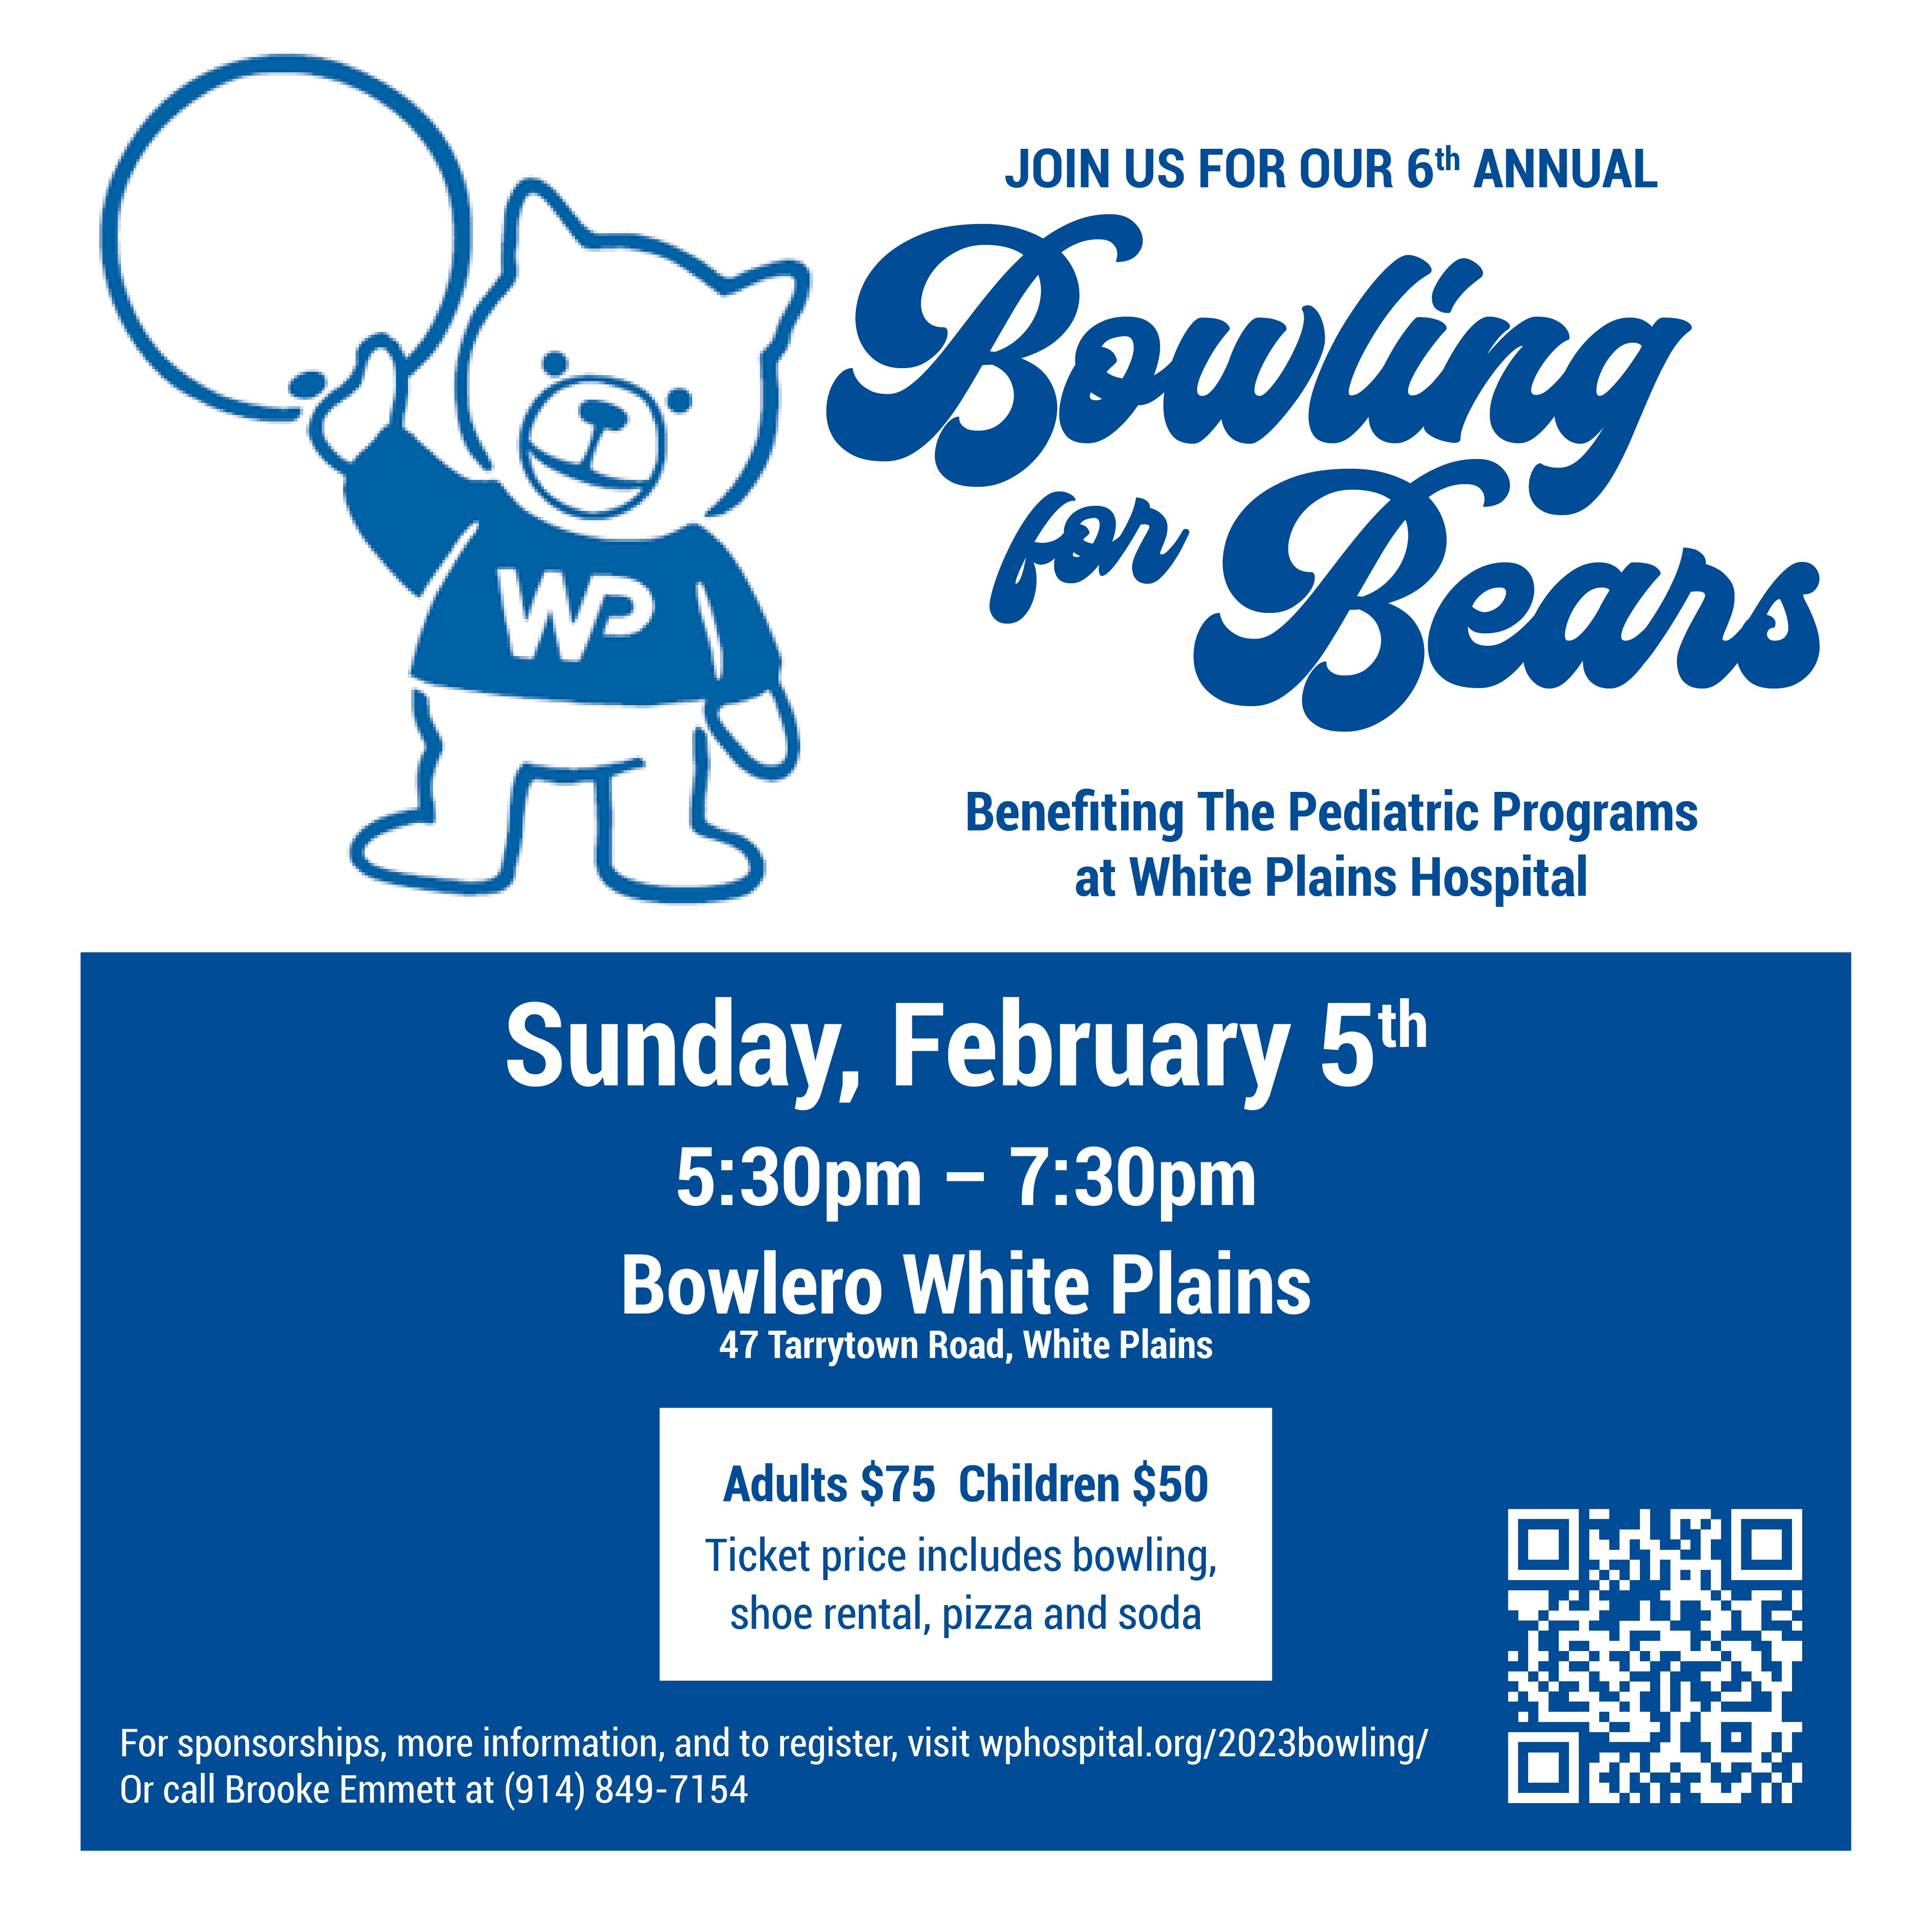 BOWLING FOR BEARS 2023